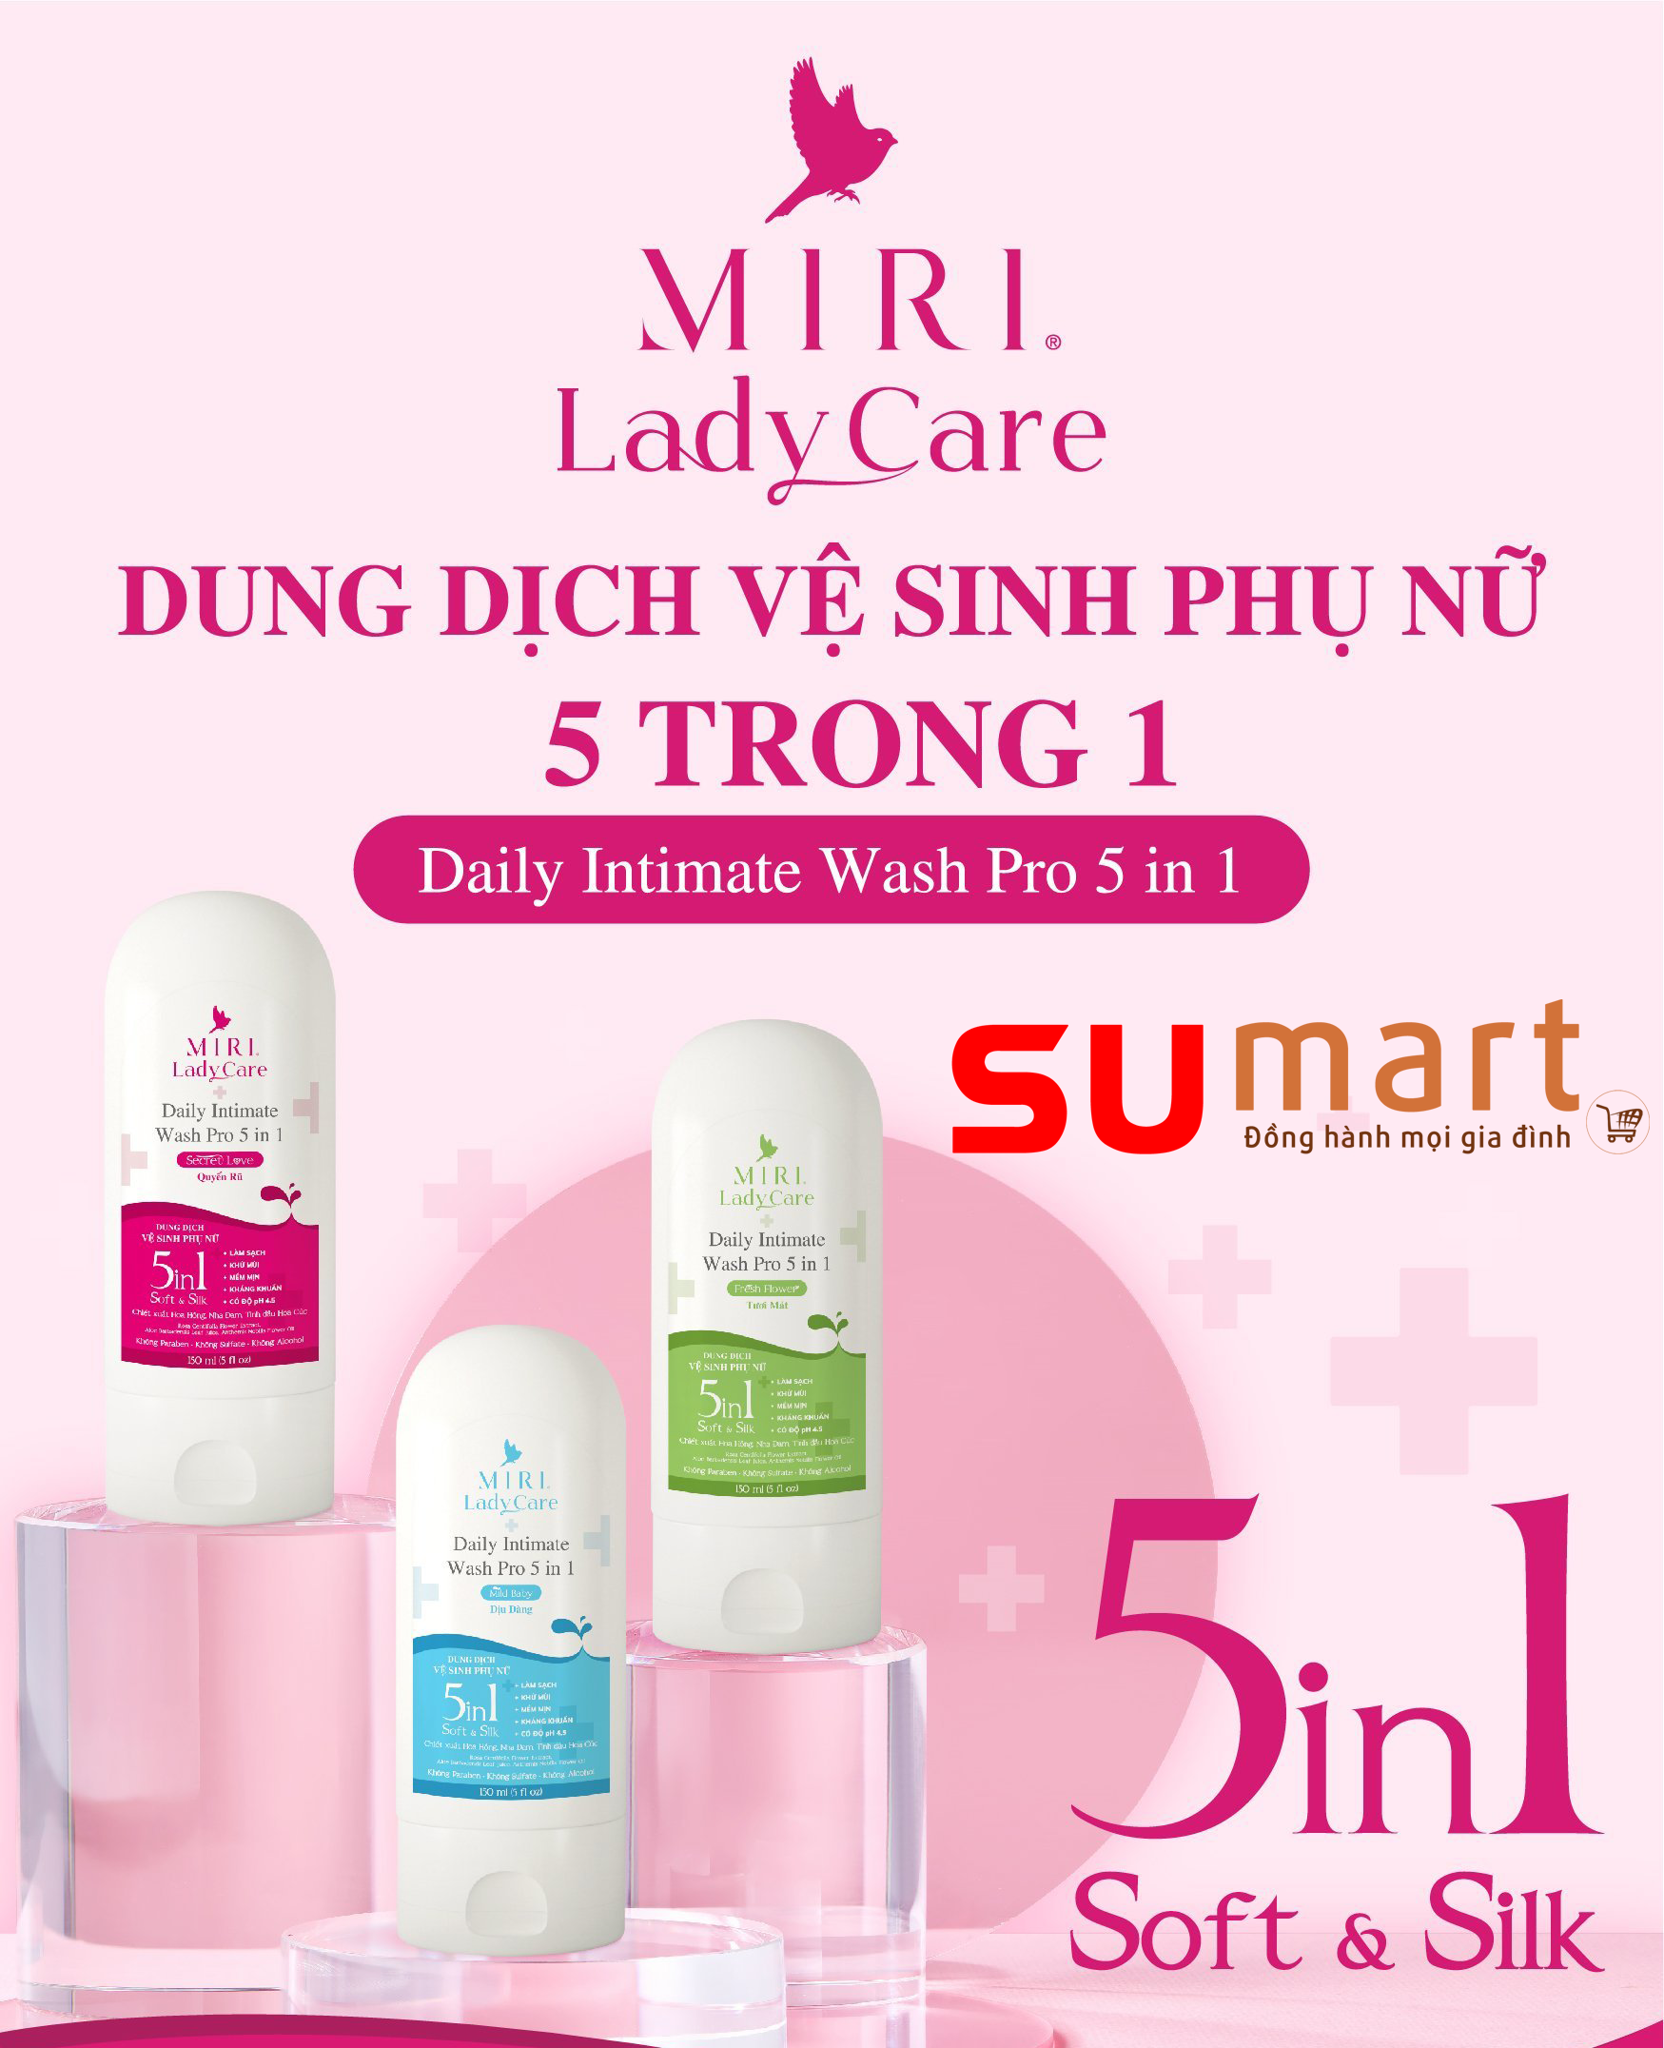 DUNG DỊCH VỆ SINH PHỤ NỮ 5 TRONG 1 - RA MẮT 1/11 - DAILY INTIMATE WASH PRO 5 IN 1